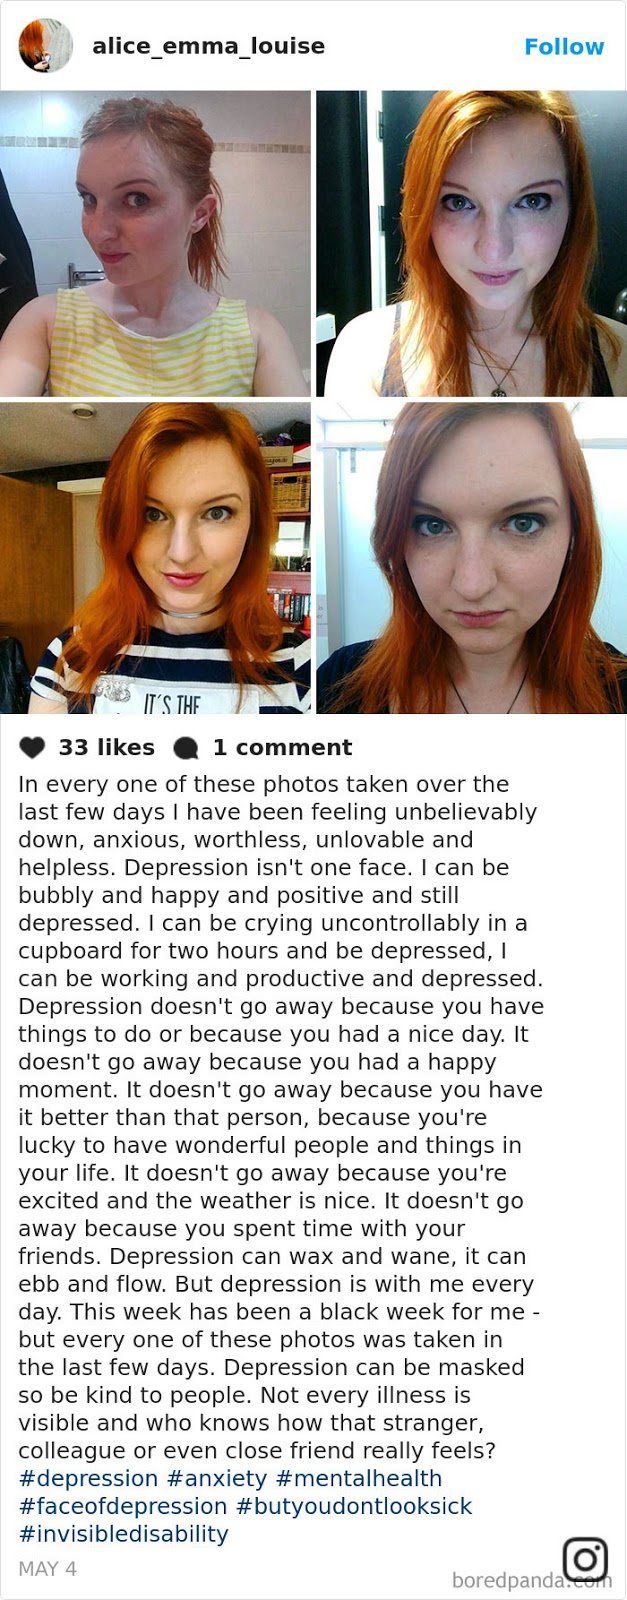 40 Brutally Honest Pictures Show How Easily Depression Can Be Concealed